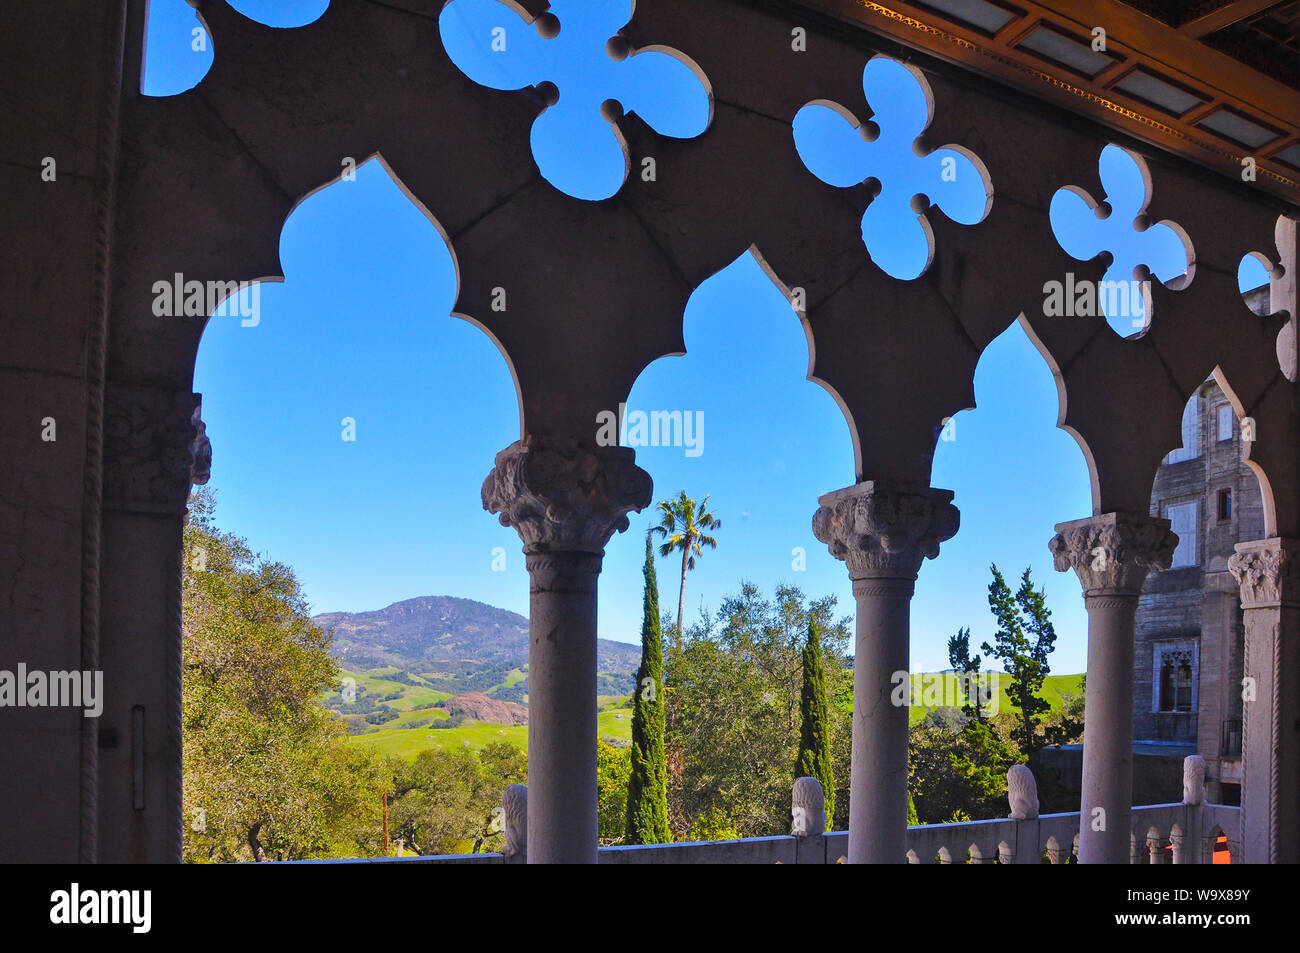 A beautiful view from a stunning Gothic window located in Hearst Castle, San Simeon, California. Stock Photo